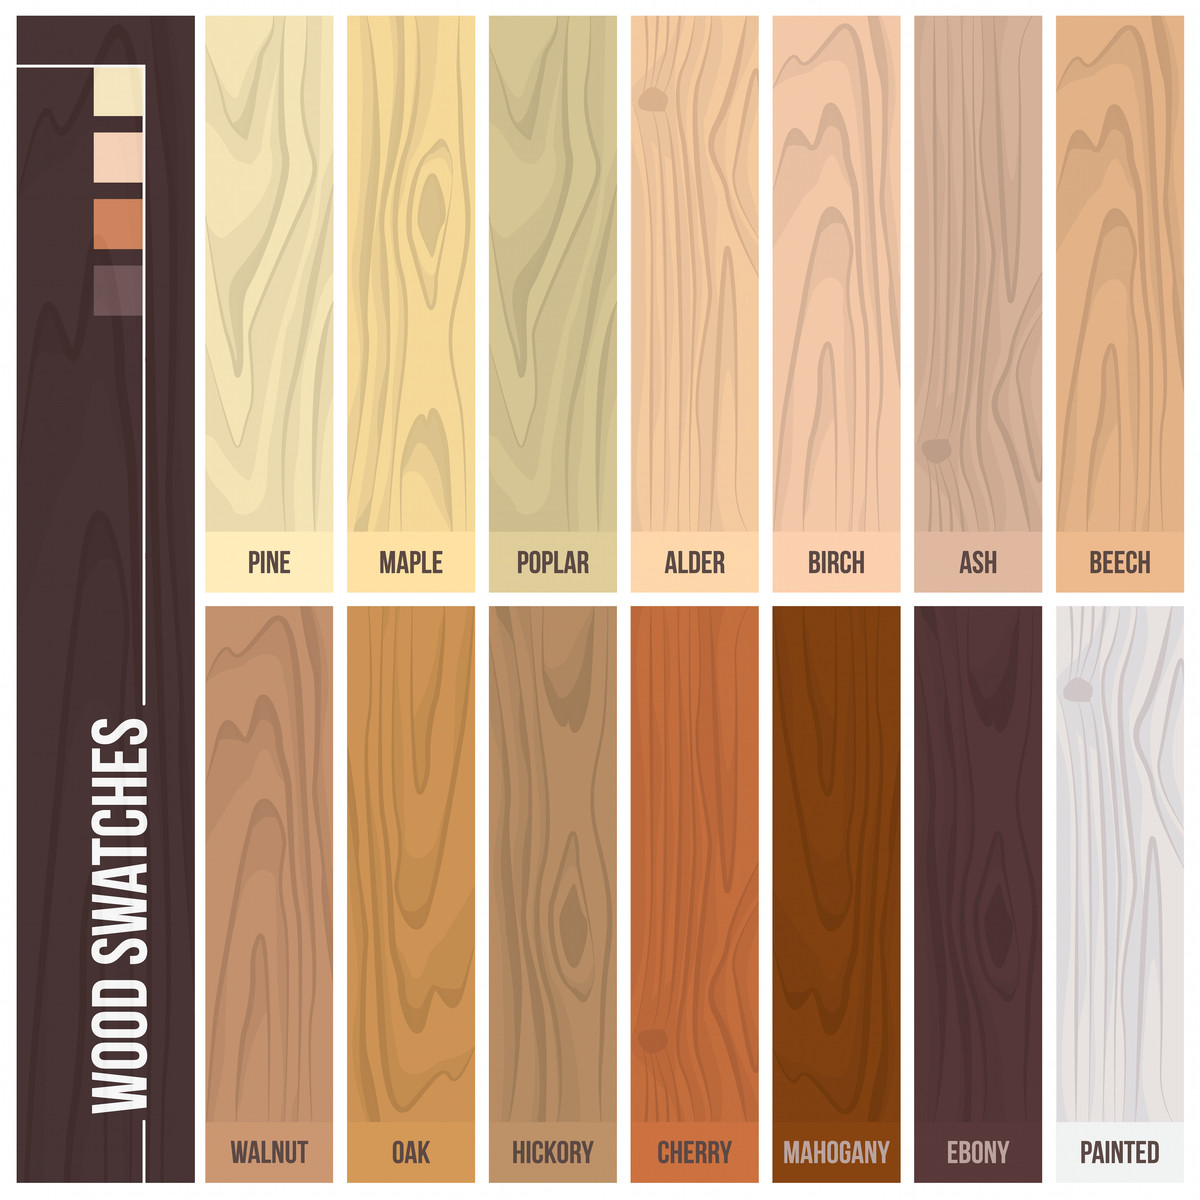 14 Fabulous Hardwood Flooring Engineered Vs solid Cost 2022 free download hardwood flooring engineered vs solid cost of 12 types of hardwood flooring species styles edging dimensions intended for types of hardwood flooring illustrated guide